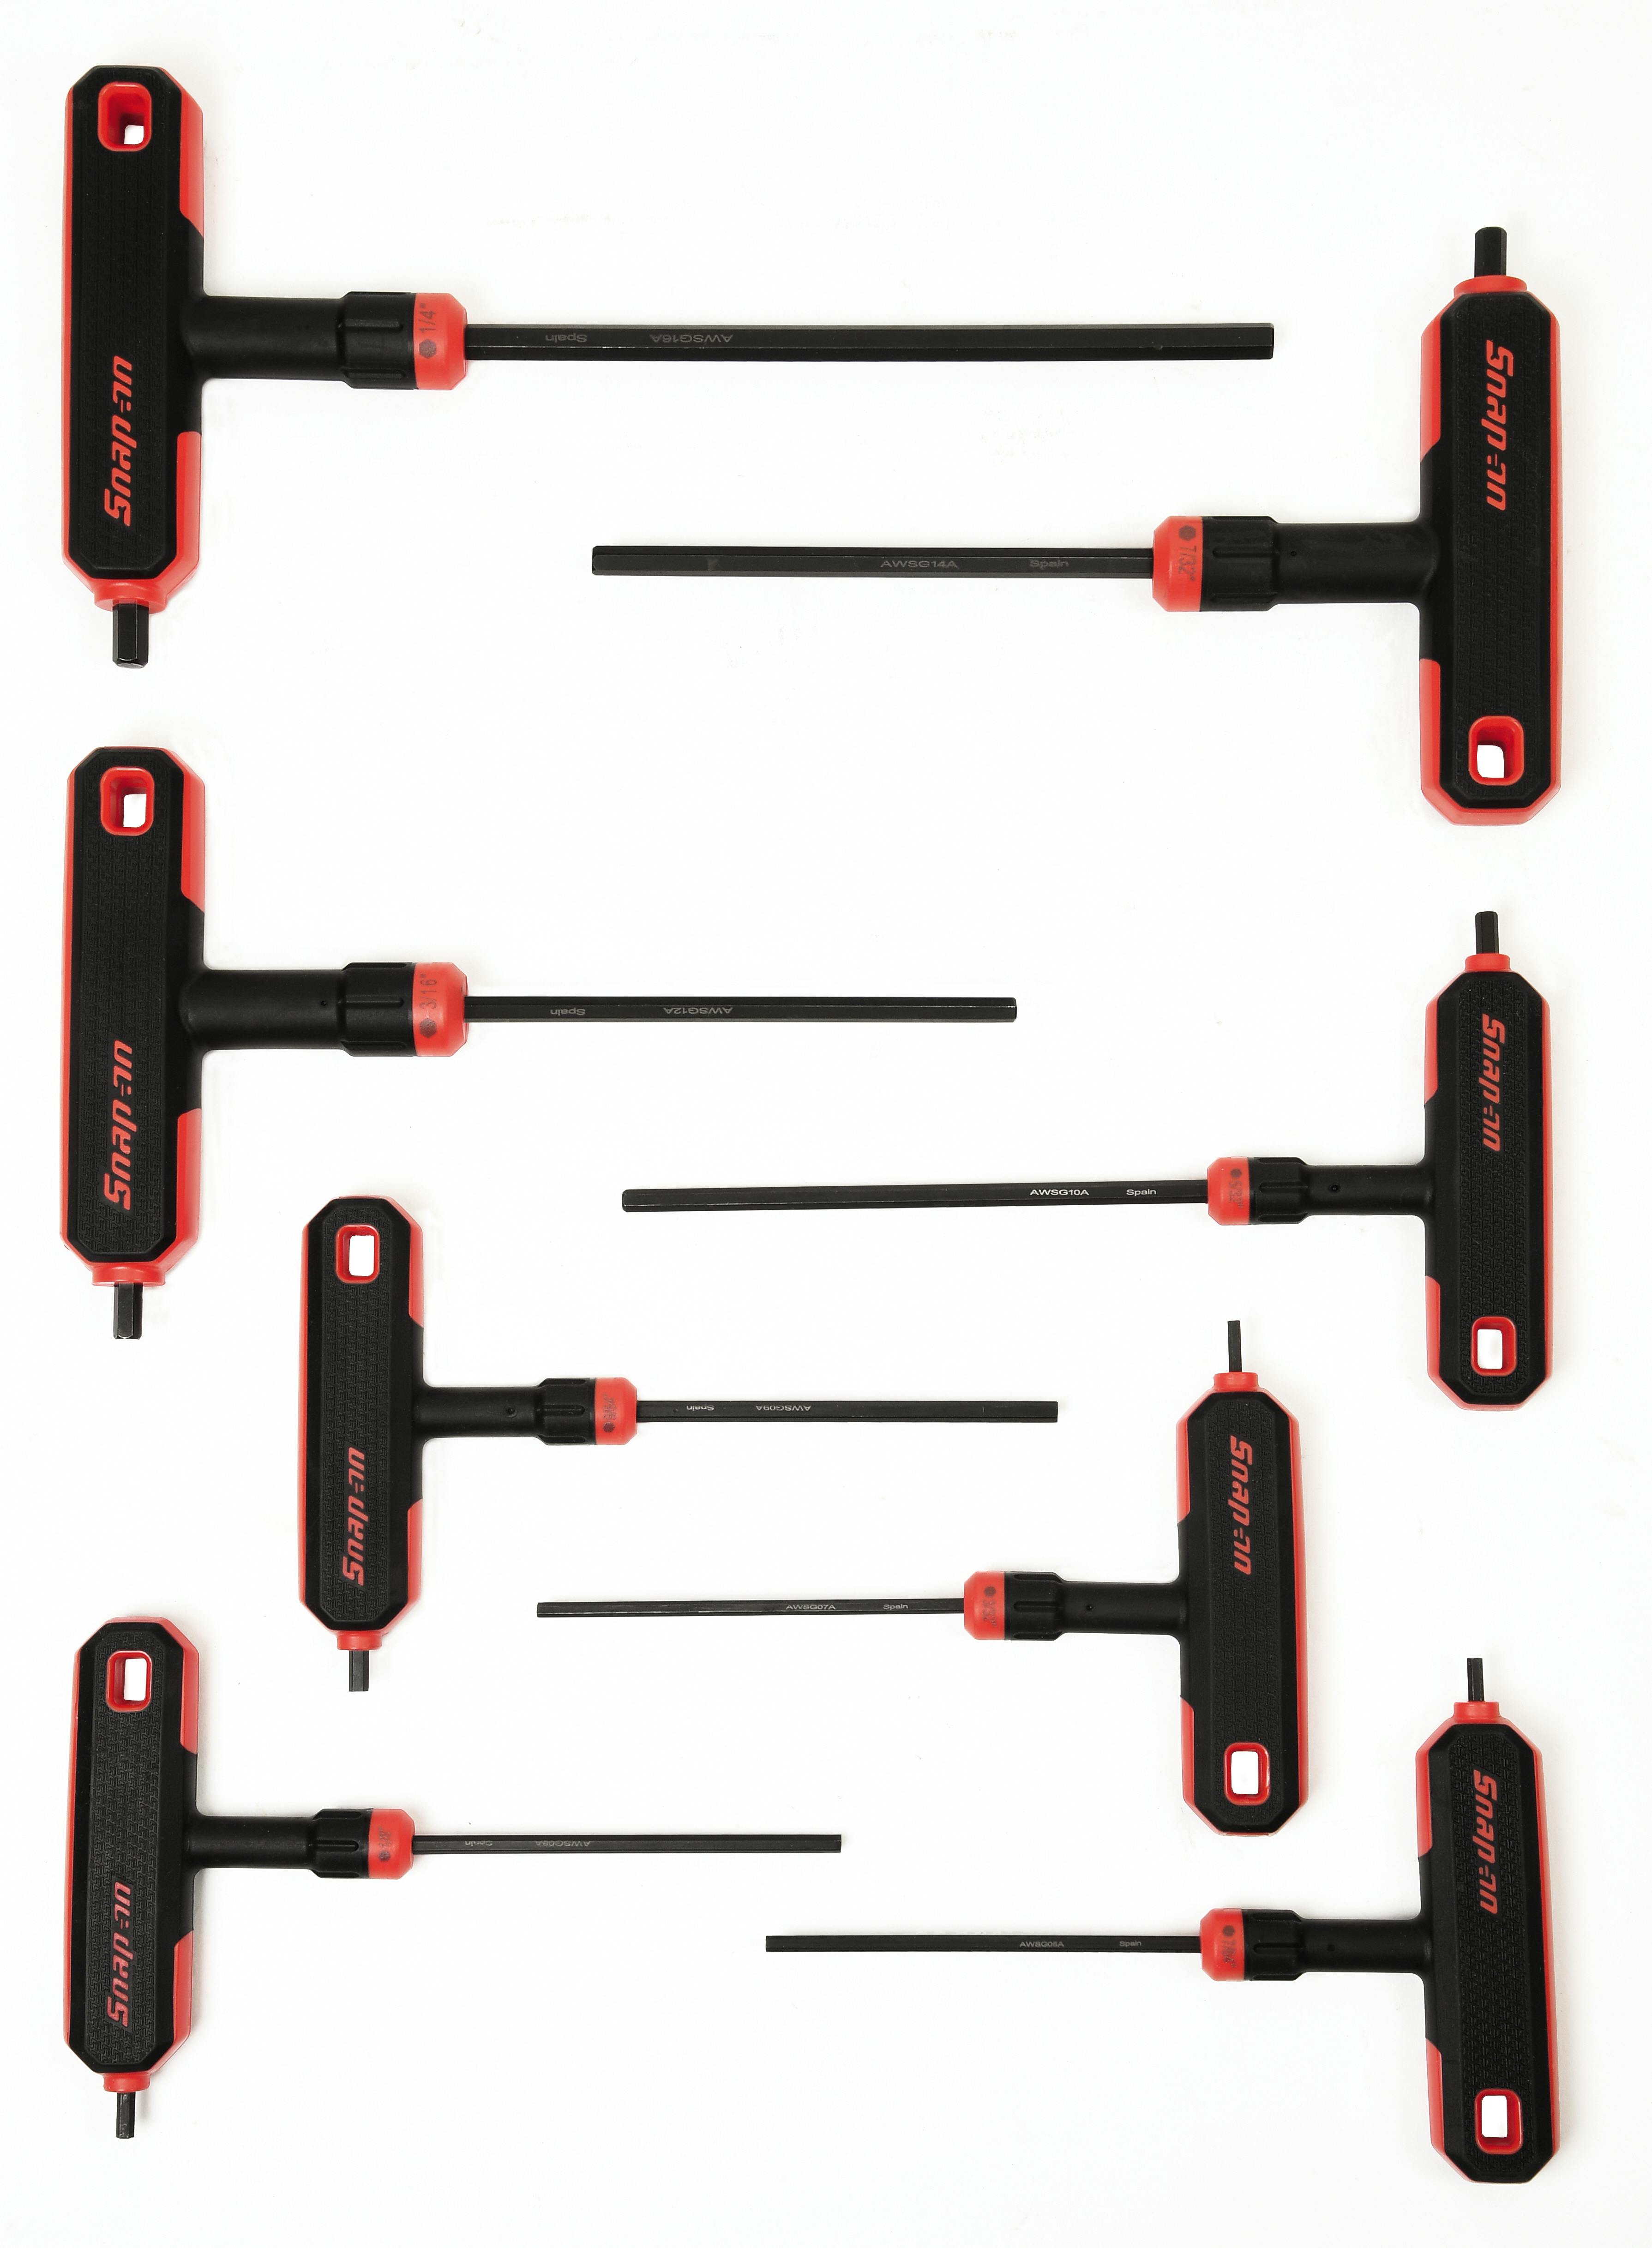 SAE Details about   *NEW* Snap On AWSG800A 8 Pc T-Handle/L-Shaped Hex Combo Soft Grip